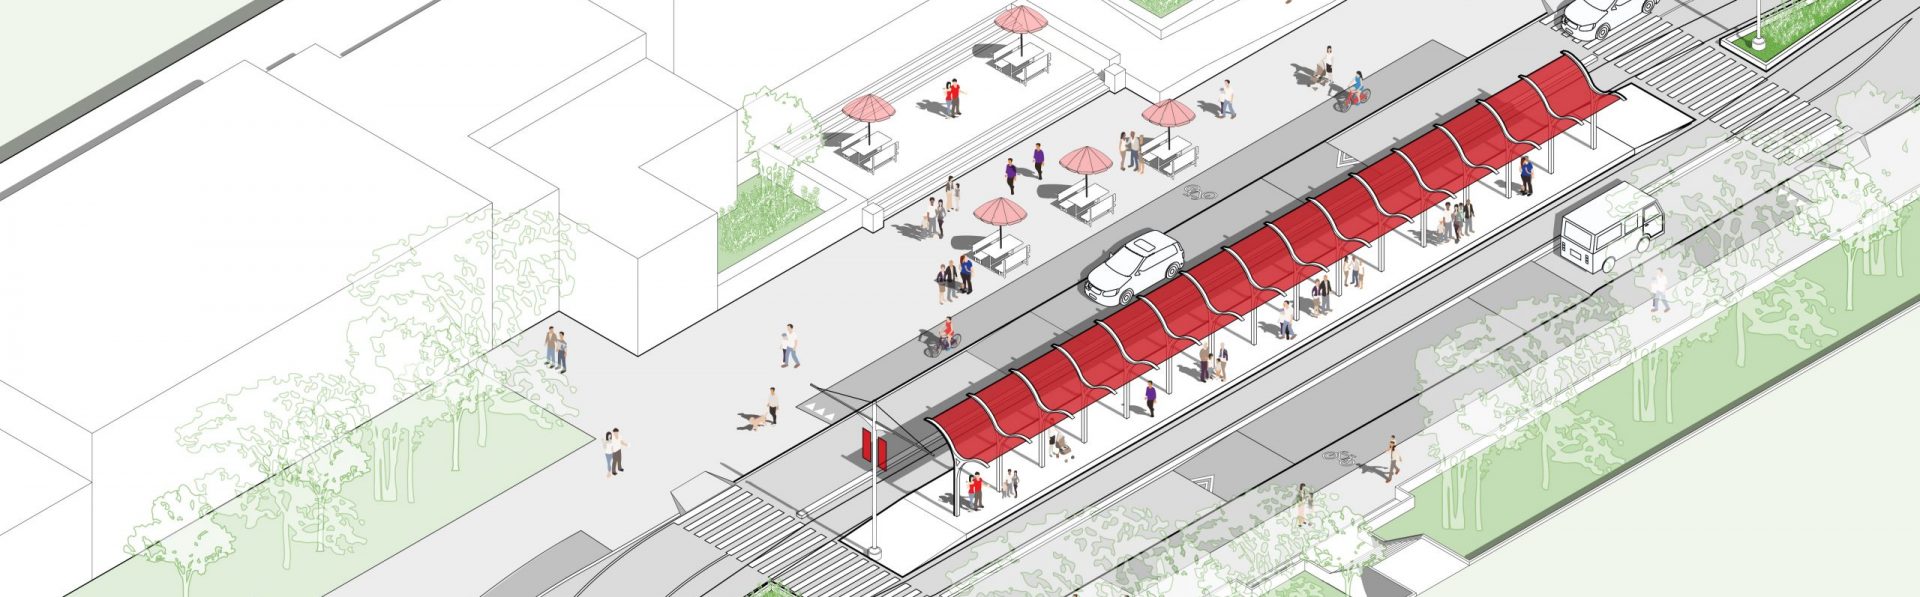 Street Plans Looks to Use Tactical Urbanism in Lower Manhattan